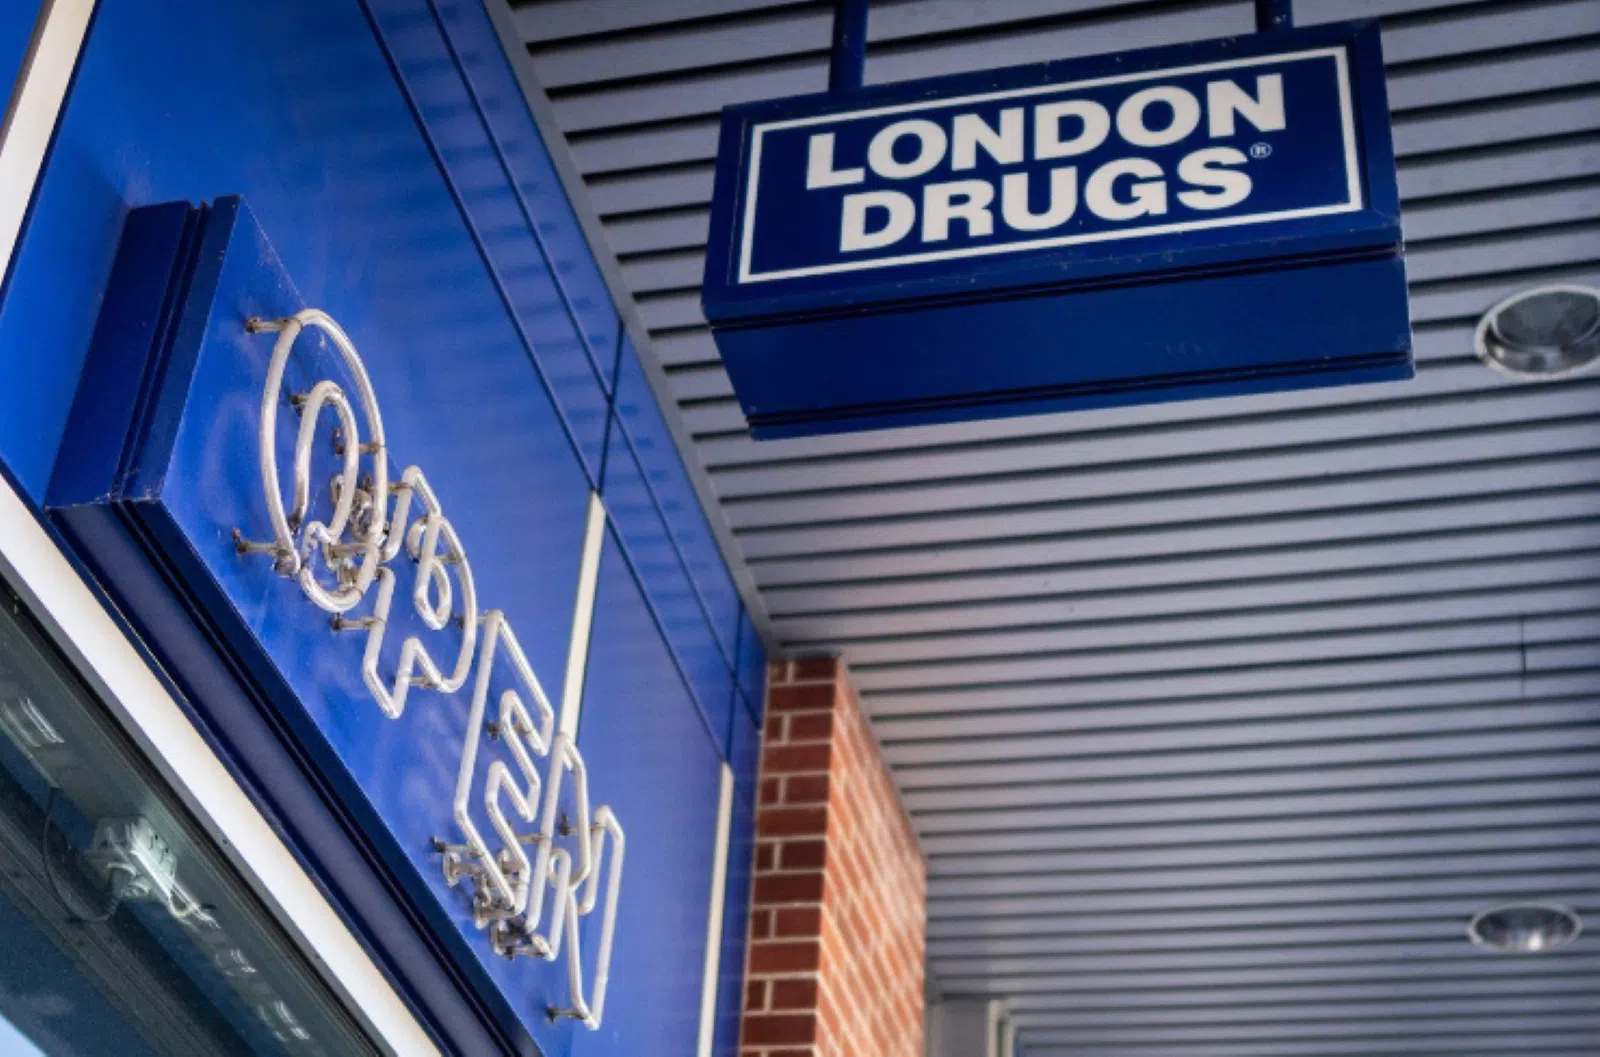 Hackers release corporate data stolen from London Drugs, company says